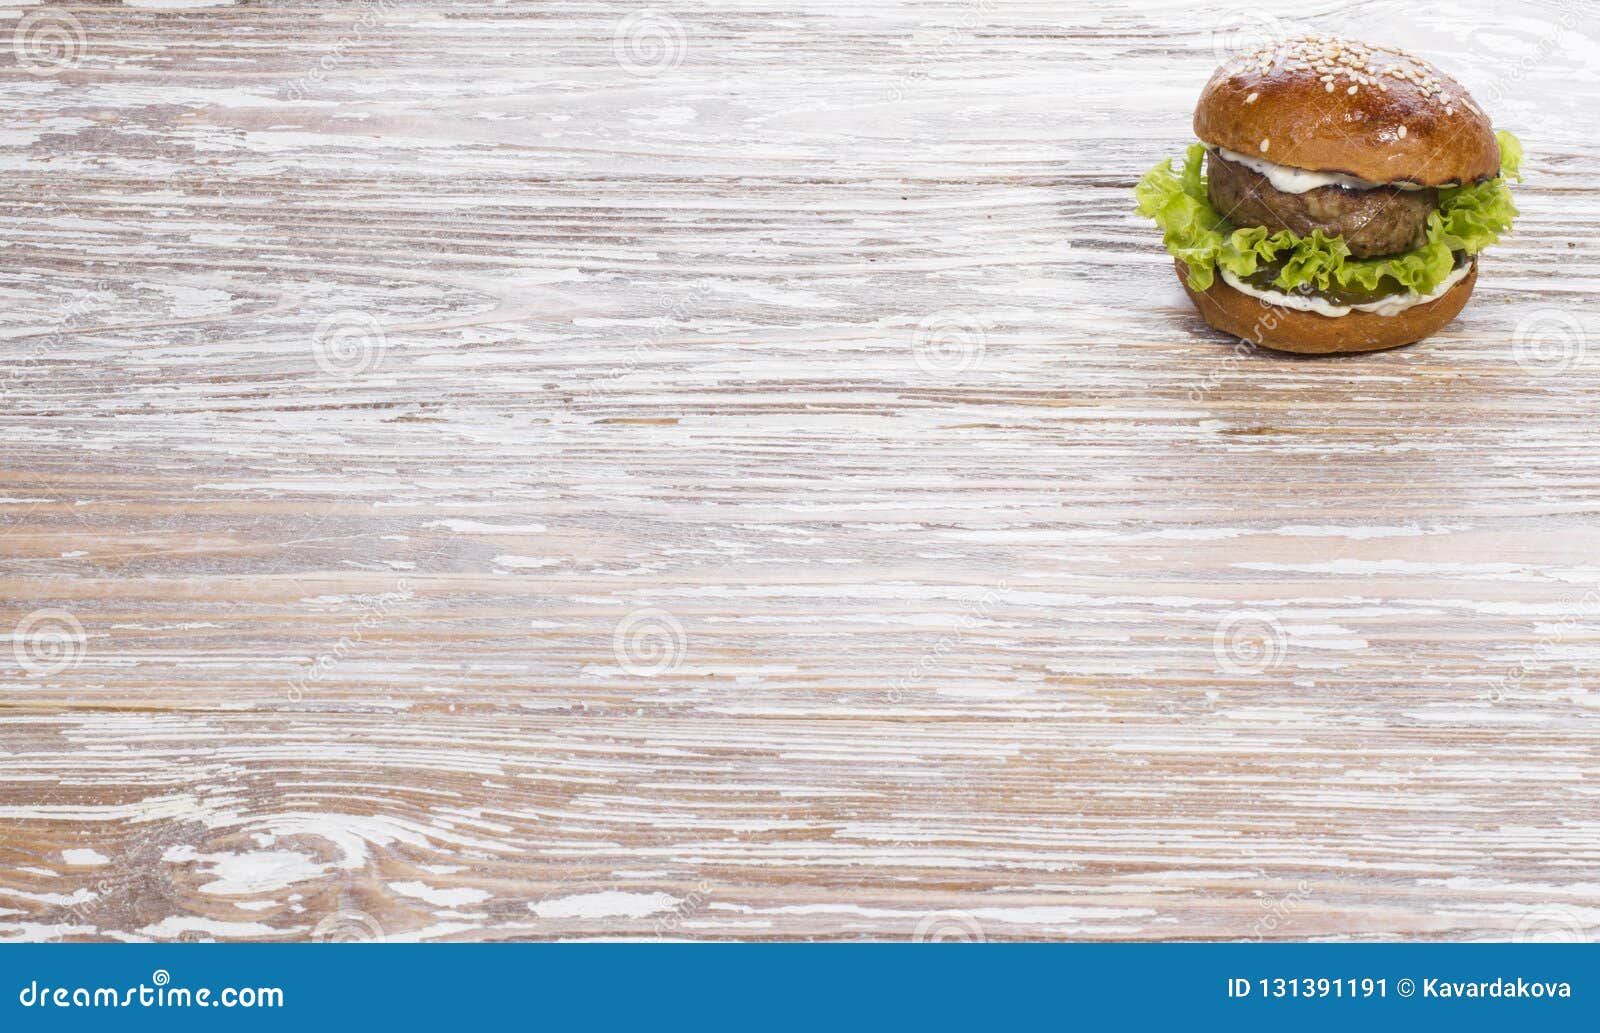 Fast Food on Wooden Table. Hamburger on Natural Background Stock Image ...